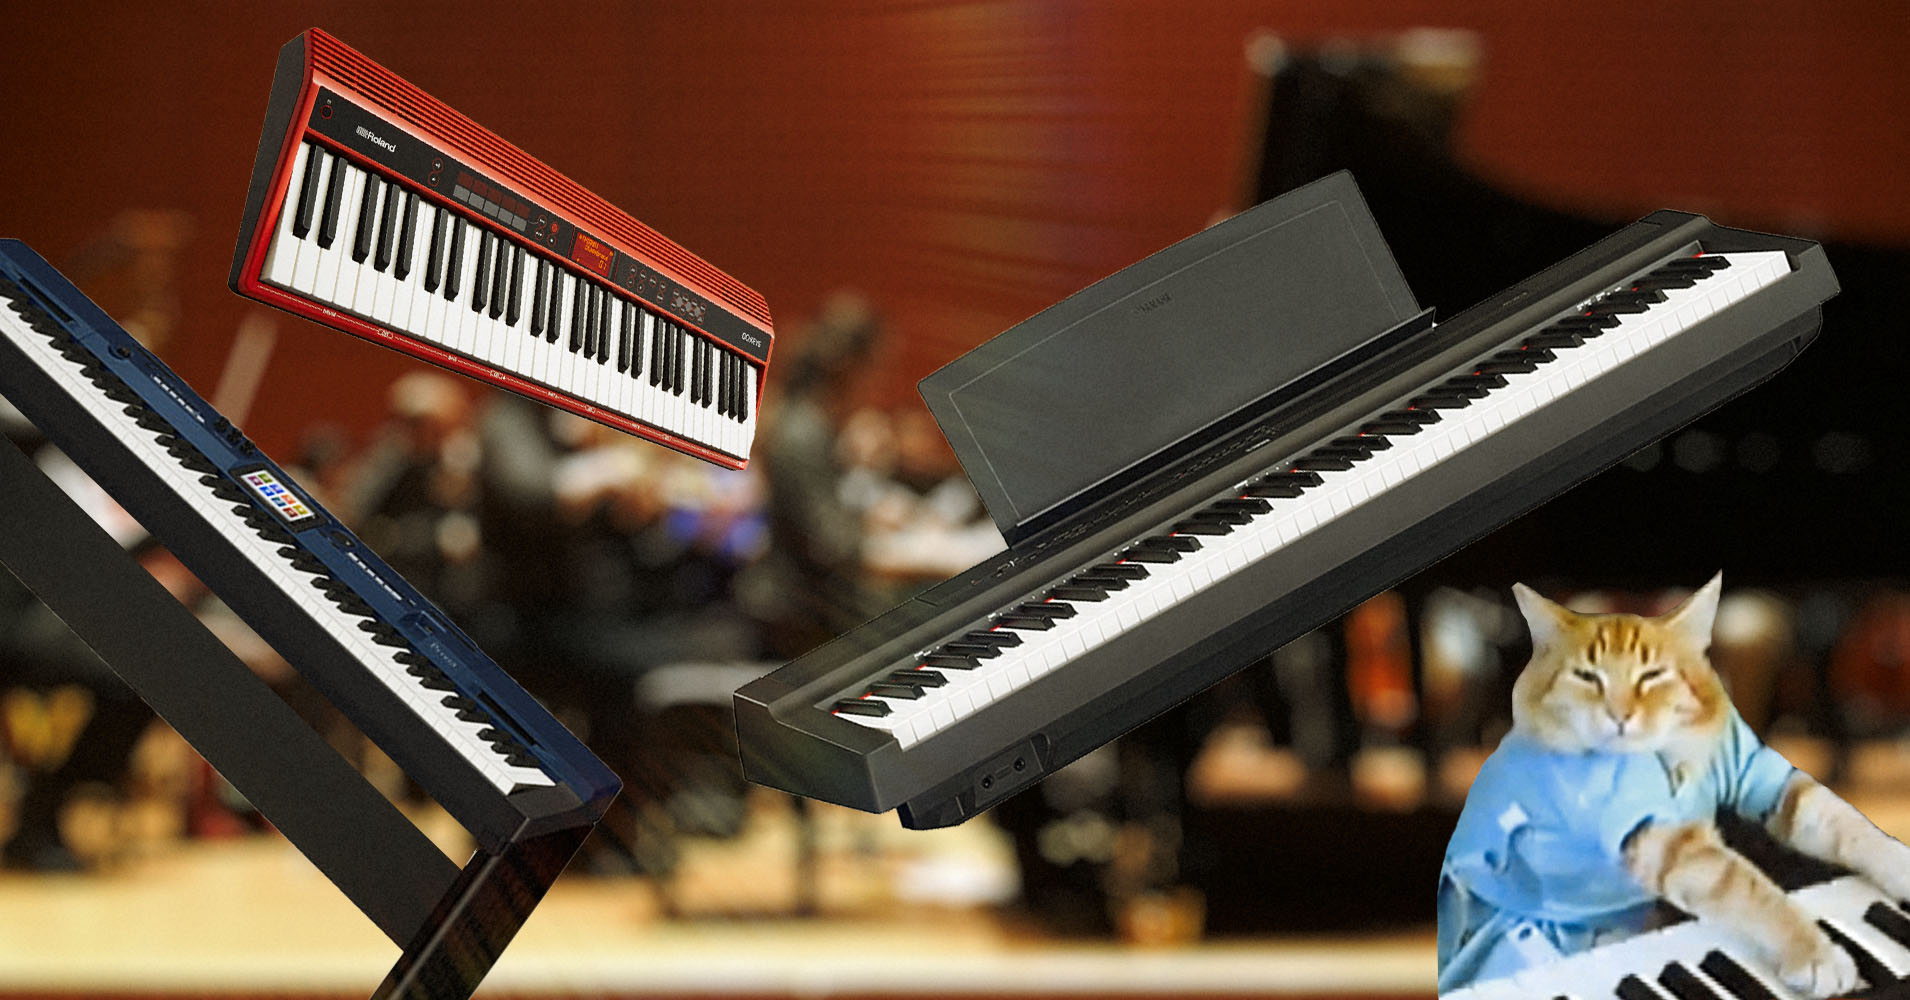 Weighted Digital Pianos for Sale: The Best Options for Piano Players